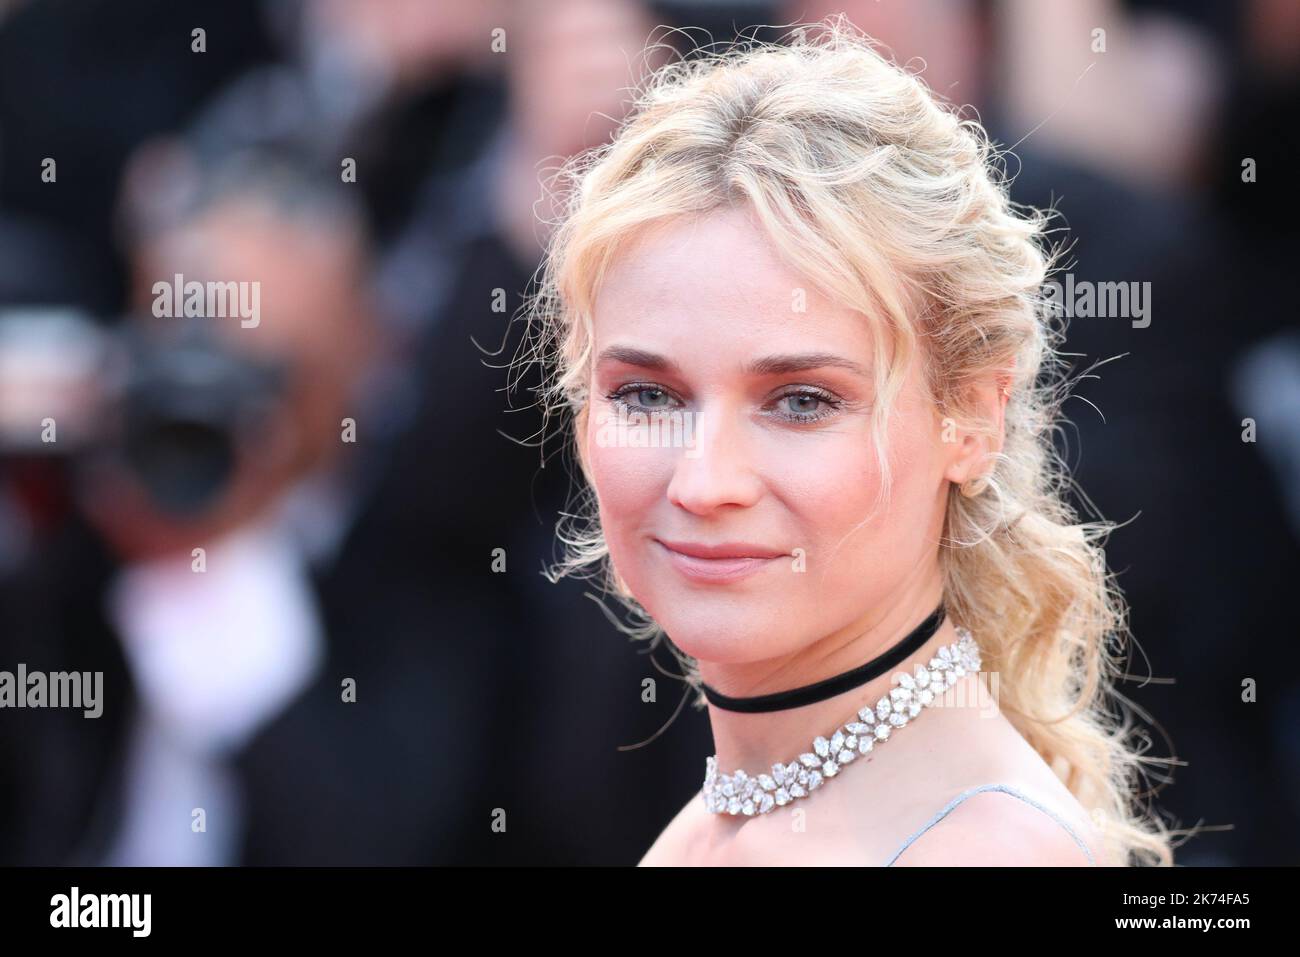 Cannes Film Festival 2017 - Day 7.  Red Carpet for the Anniversary of the  the 70th edition of the 'Festival International du Film de Cannes' on 23/05/2017 in Cannes, France. The film festival runs from 17 to 28 May. Pictured : Diane Kruger © Pierre Teyssot / Maxppp -   70th annual Cannes Film Festival in Cannes, France, May 2017. The film festival will run from 17 to 28 May. Stock Photo